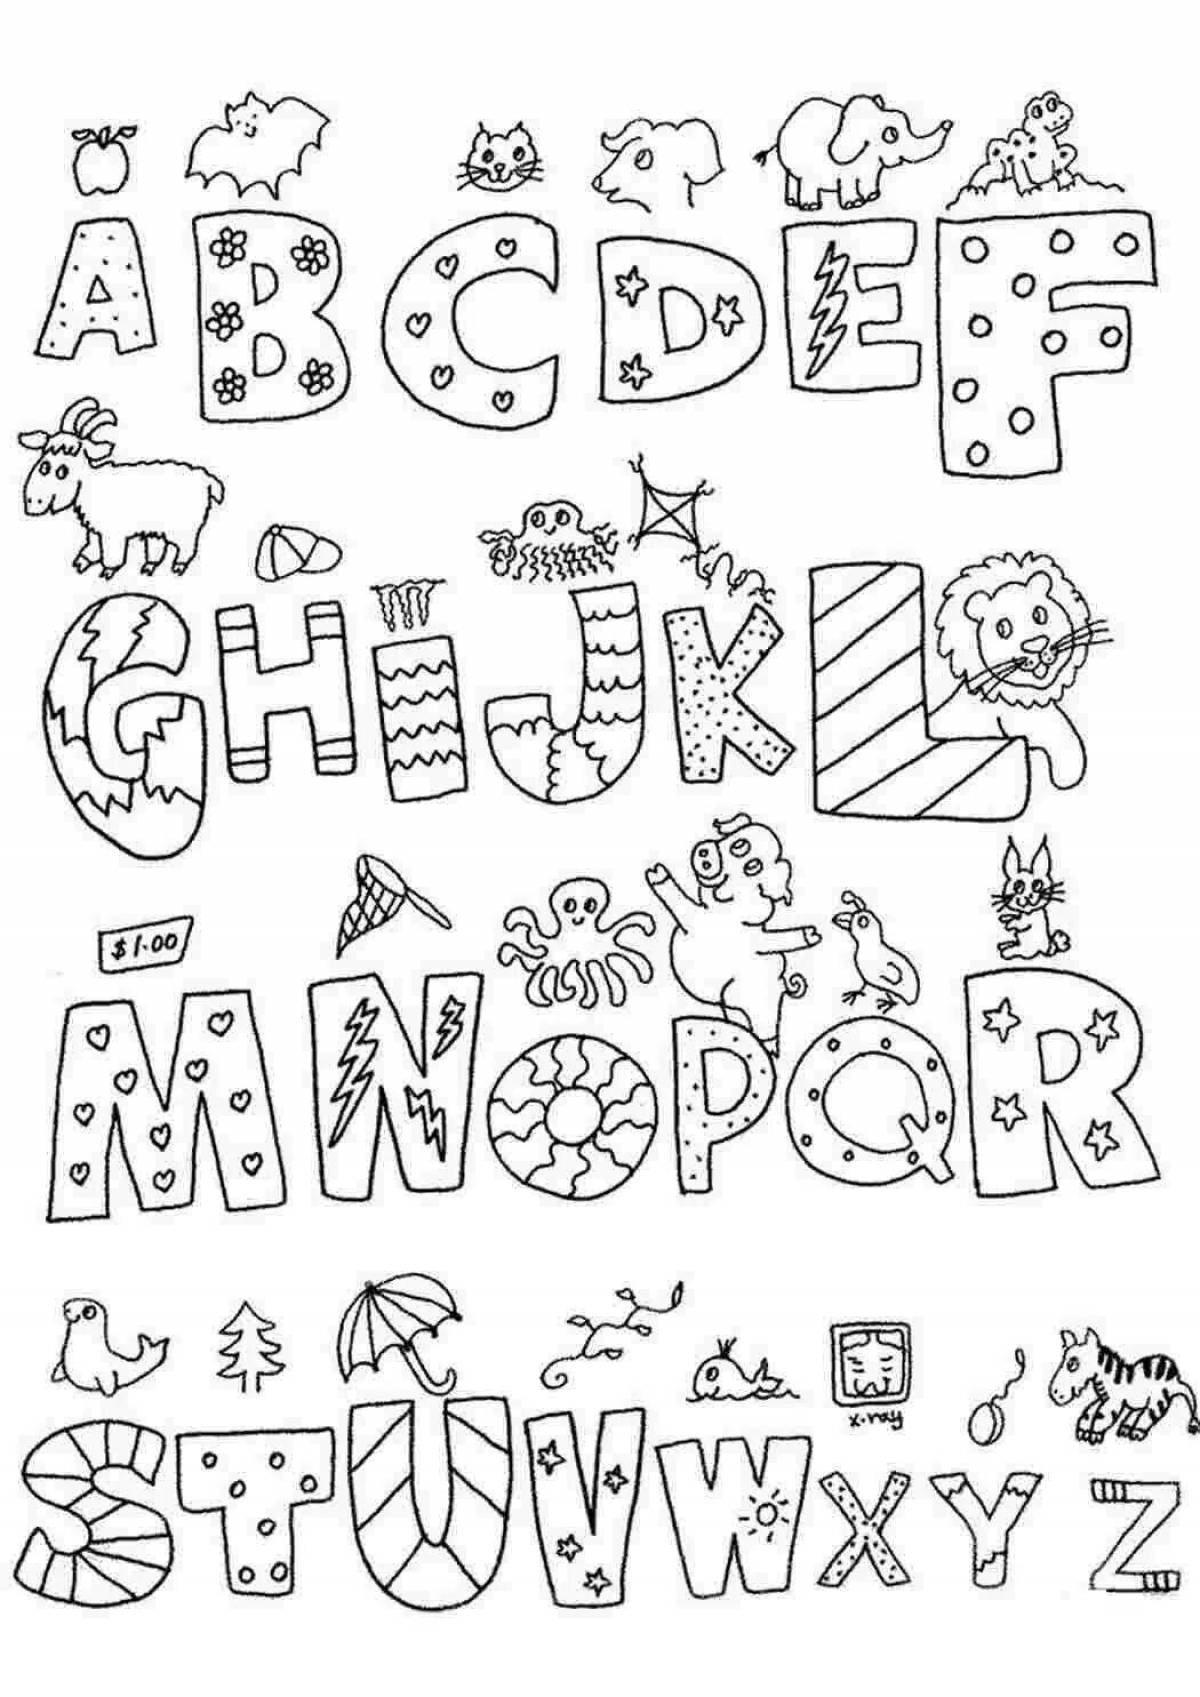 Colorful coloring page with english alphabet for kids of all faiths